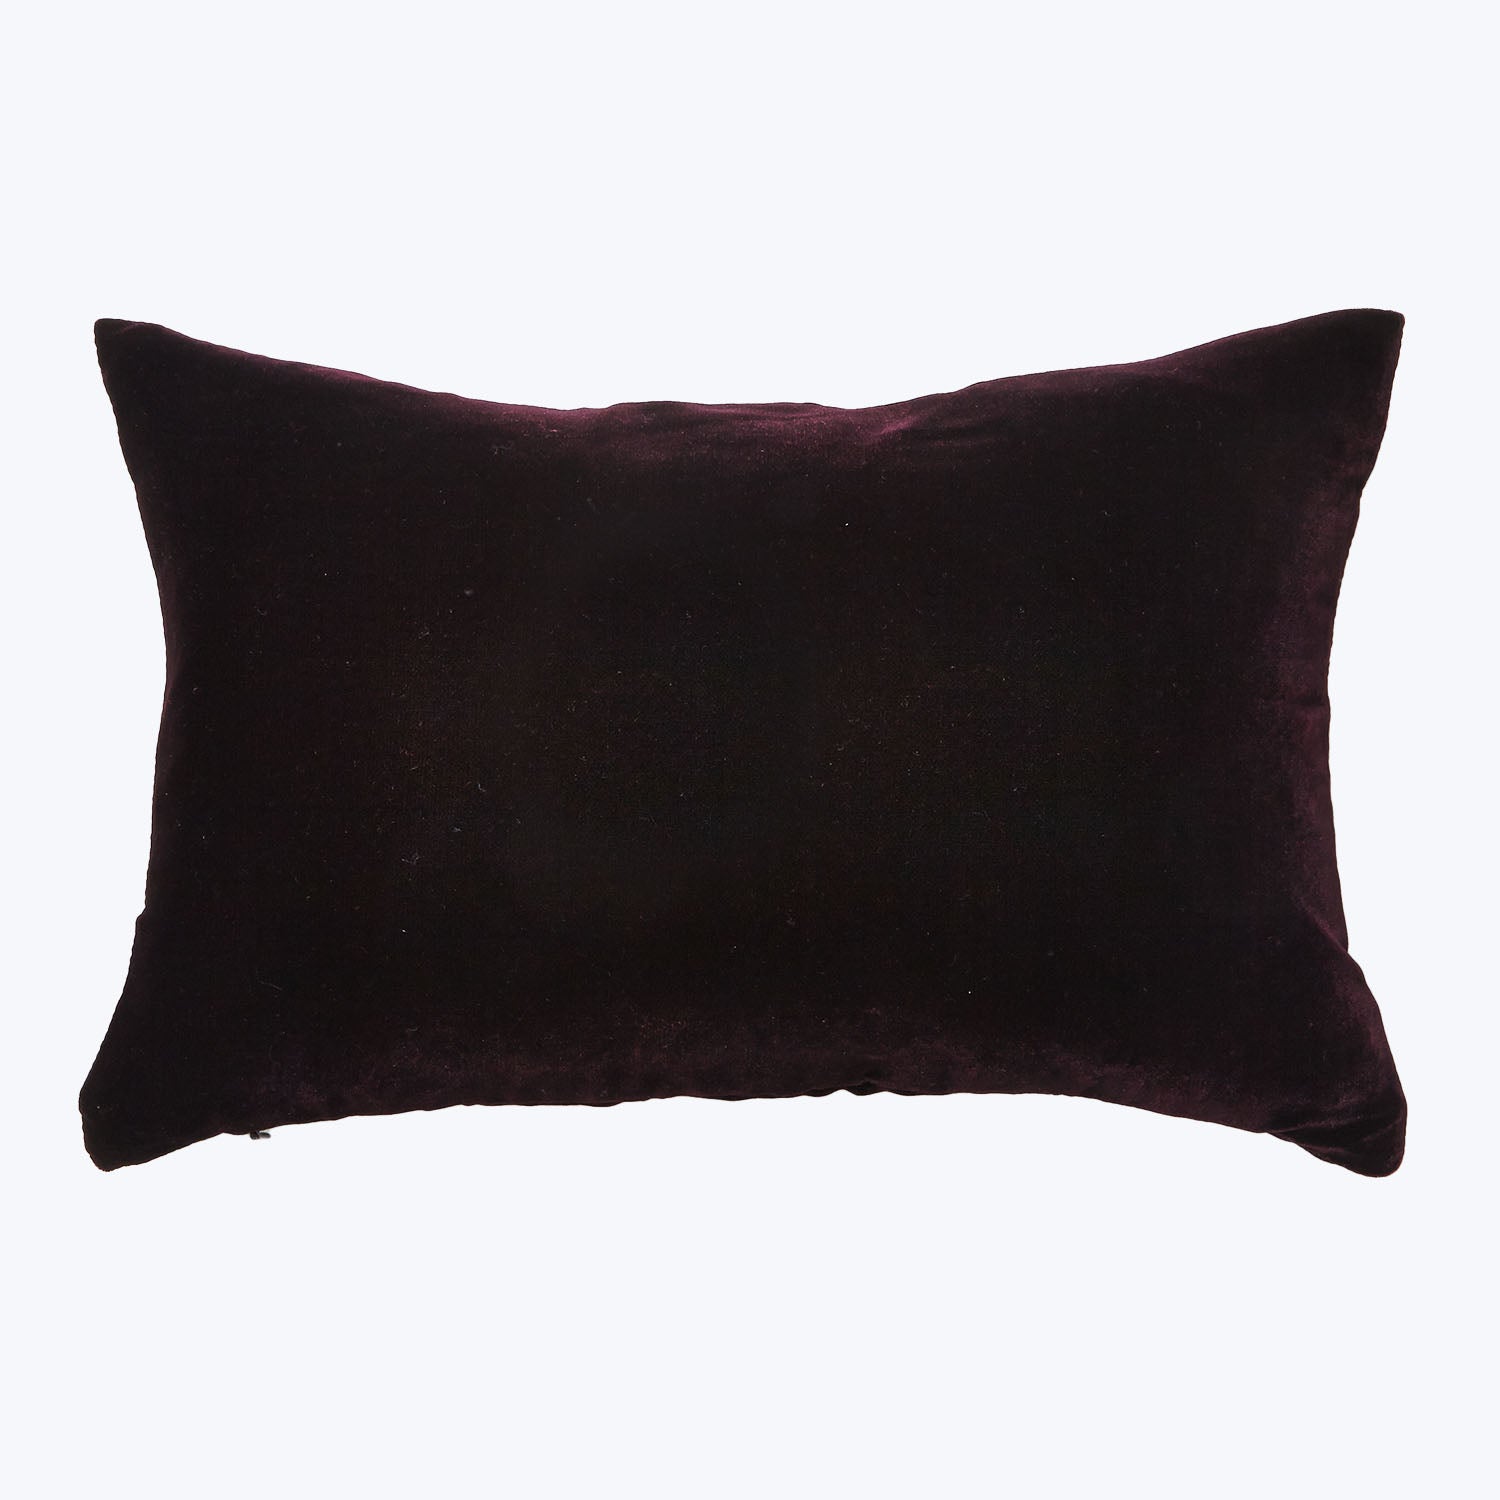 Rectangular plush pillow in deep purple with smooth surface and curved edges.